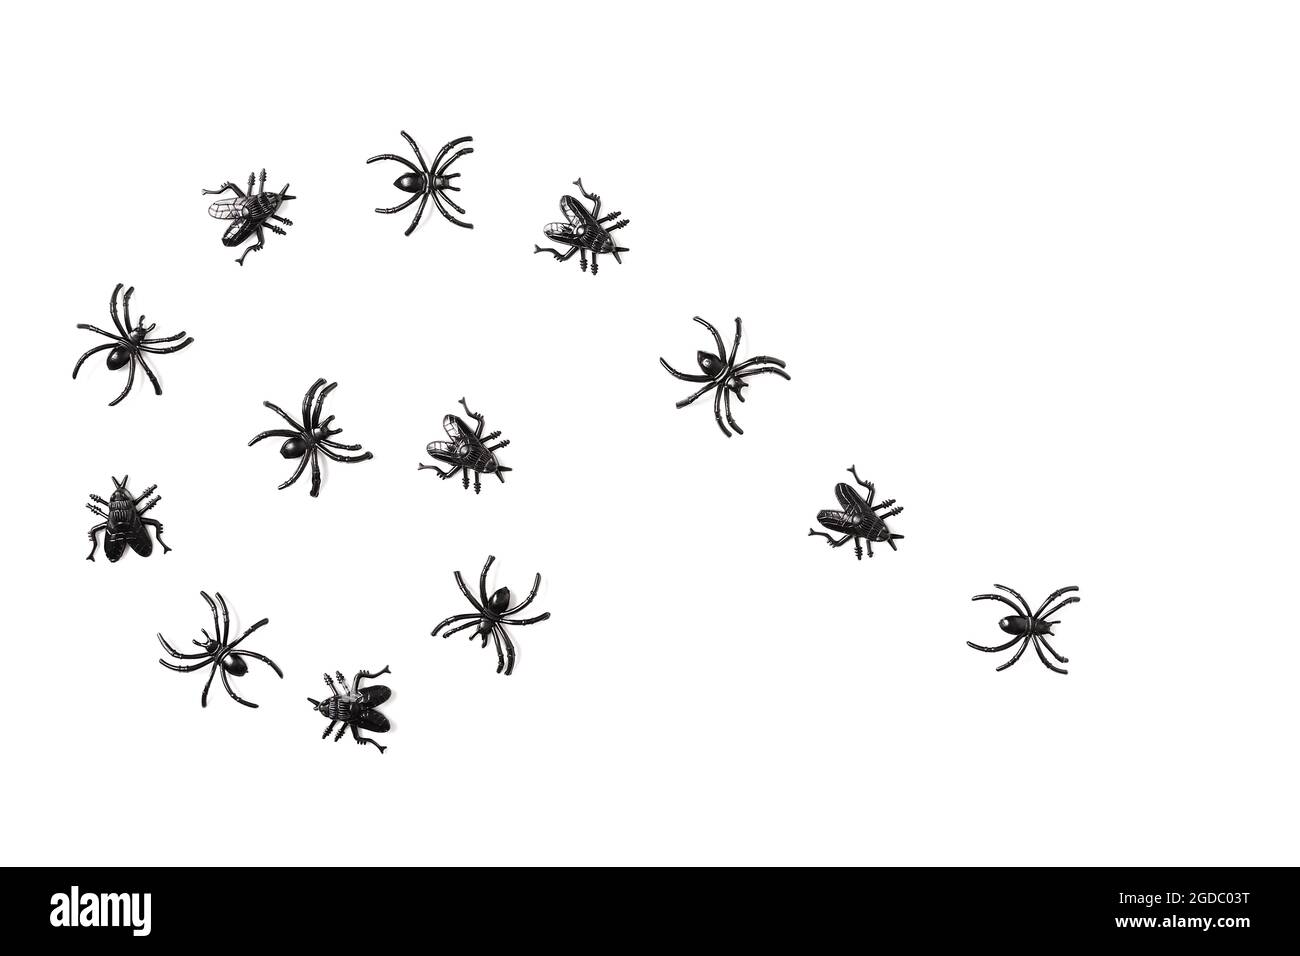 Cartoon Halloween background black insects on isolated white backdrop. Flat lay style. Halloween abstract background. Copy space. Stock Photo